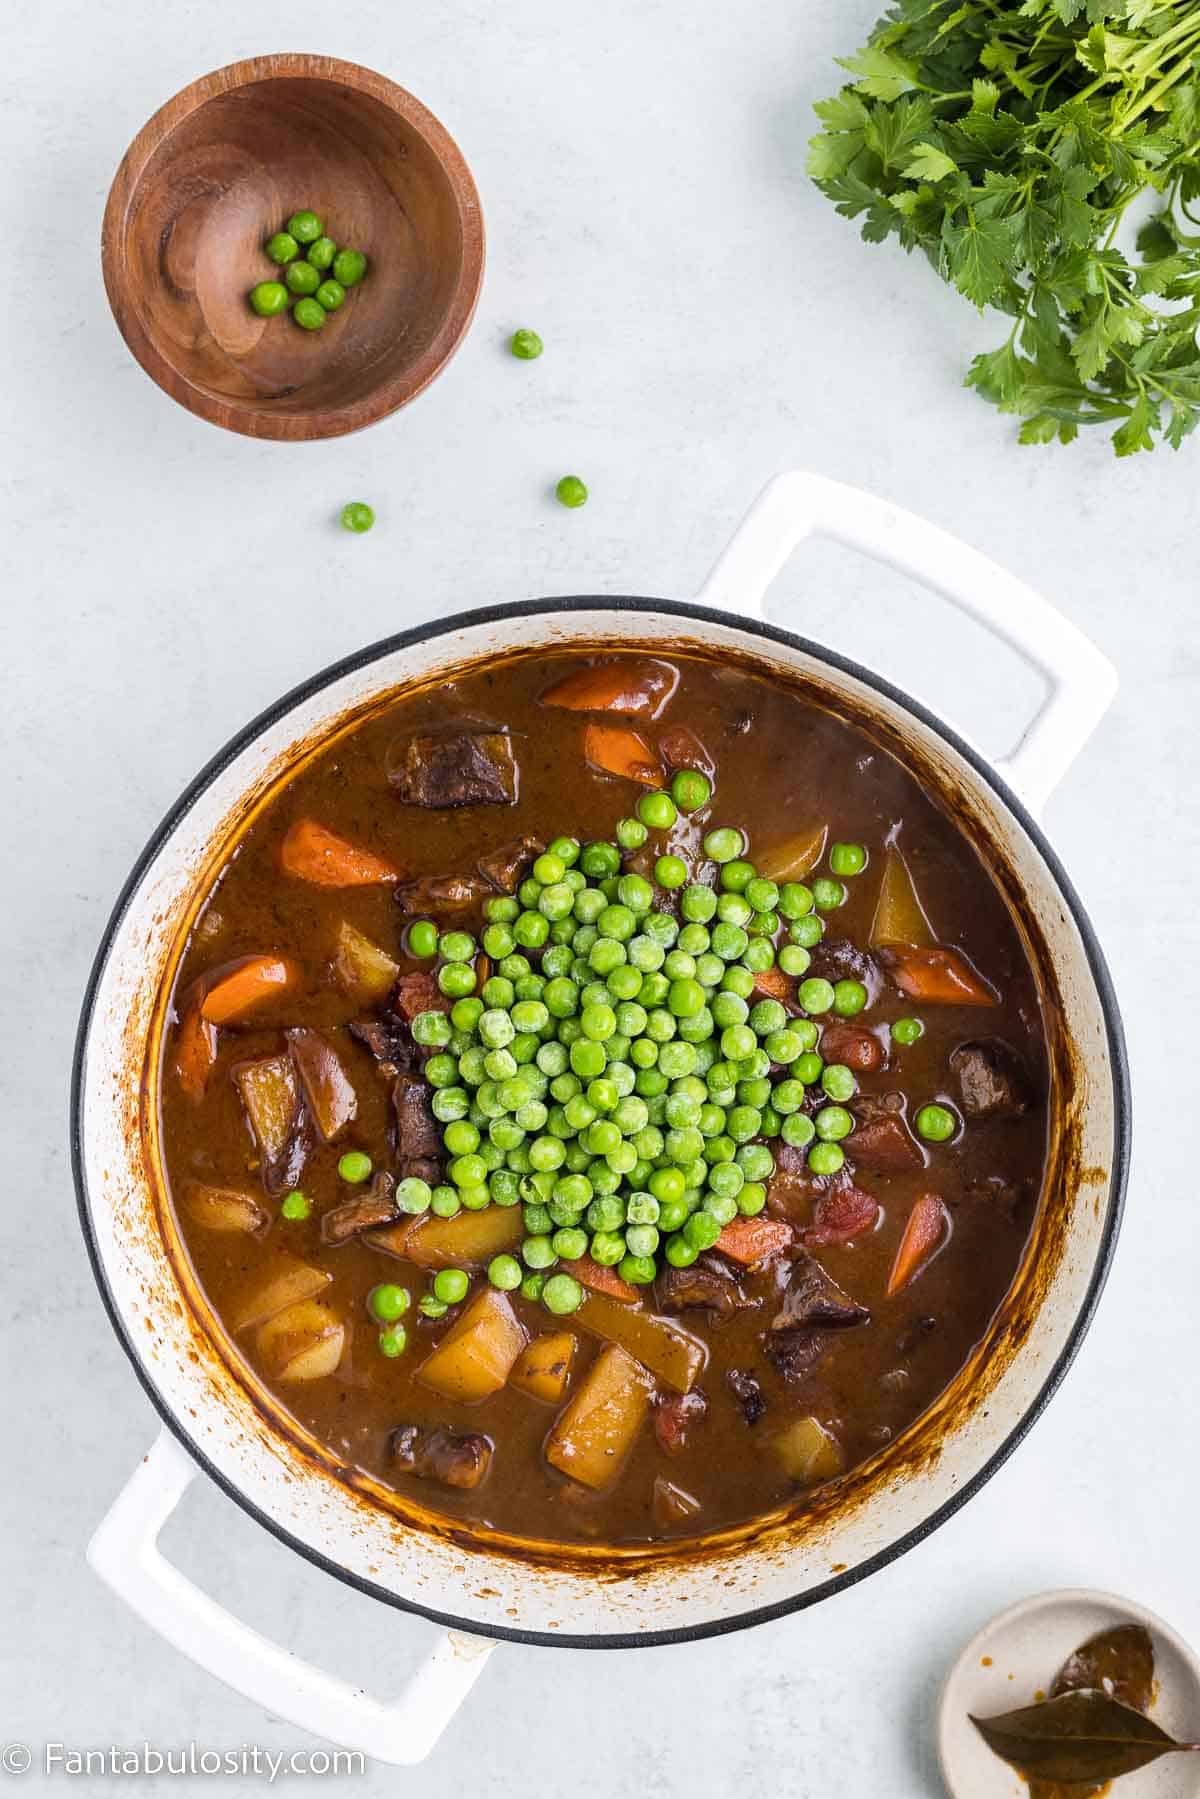 Frozen peas added to dutch oven full of beef stew.